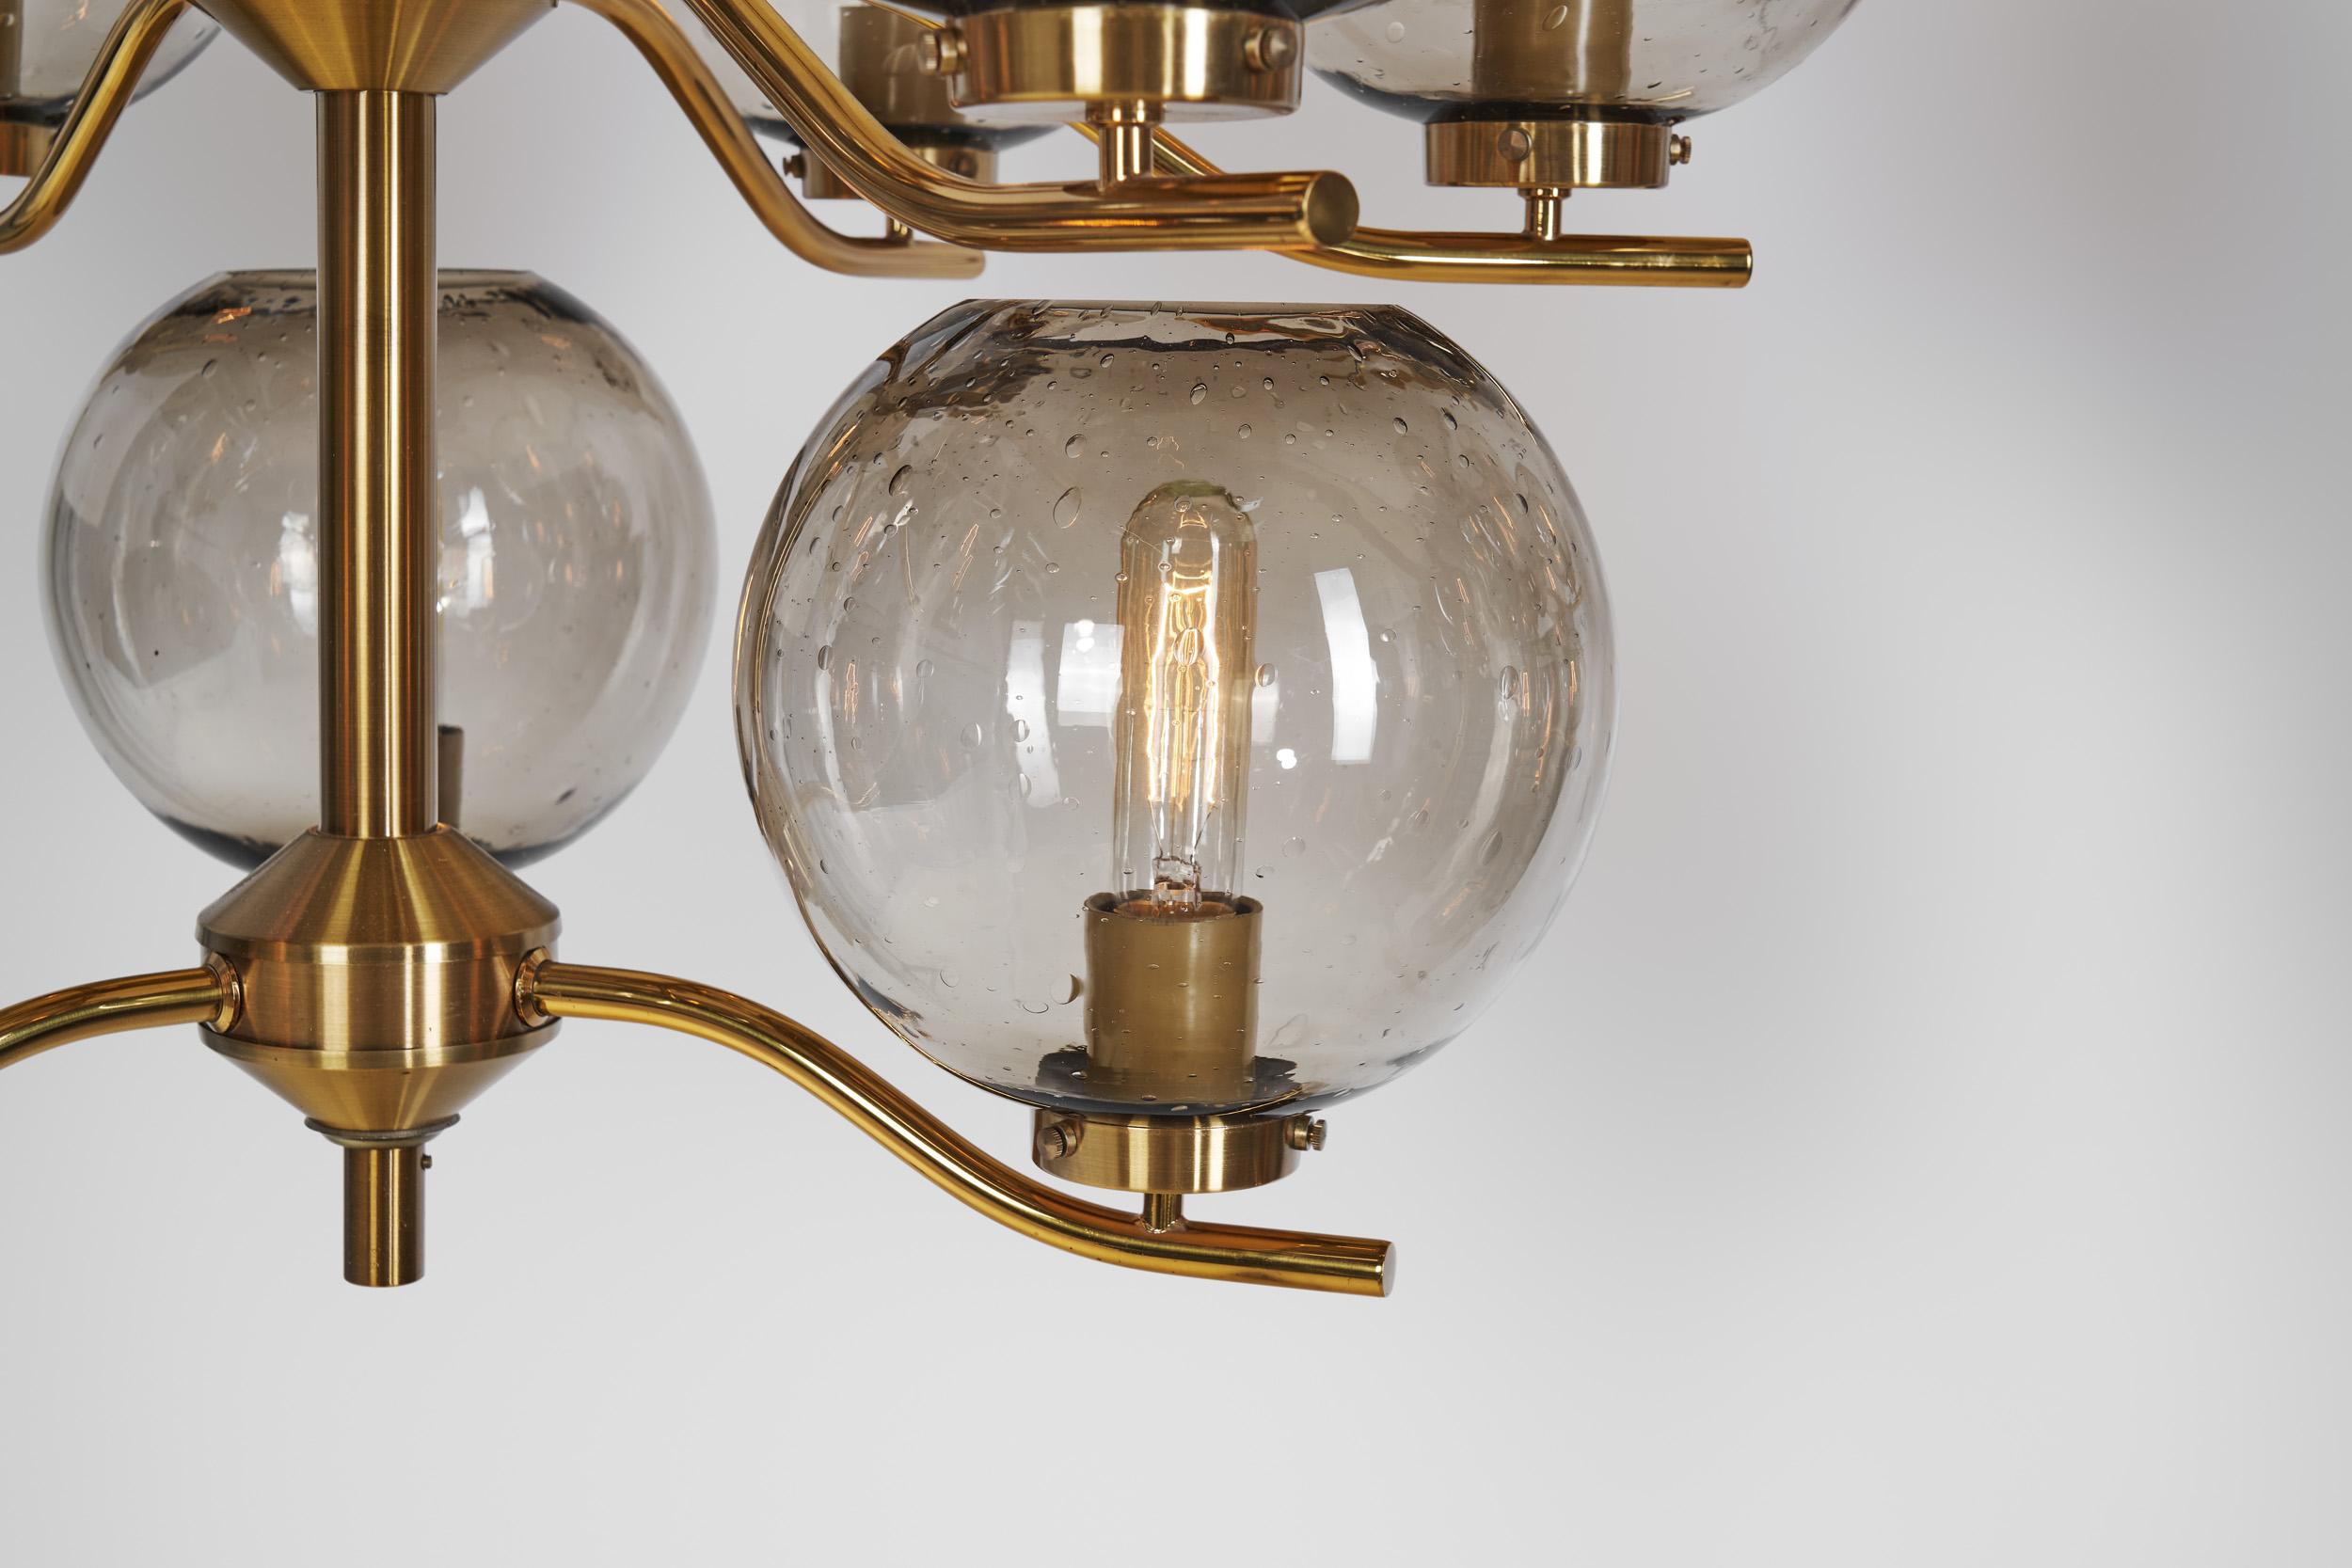 Holger Johansson Chandeliers with 12 Smoked Glass Shades, Sweden 1970s For Sale 9